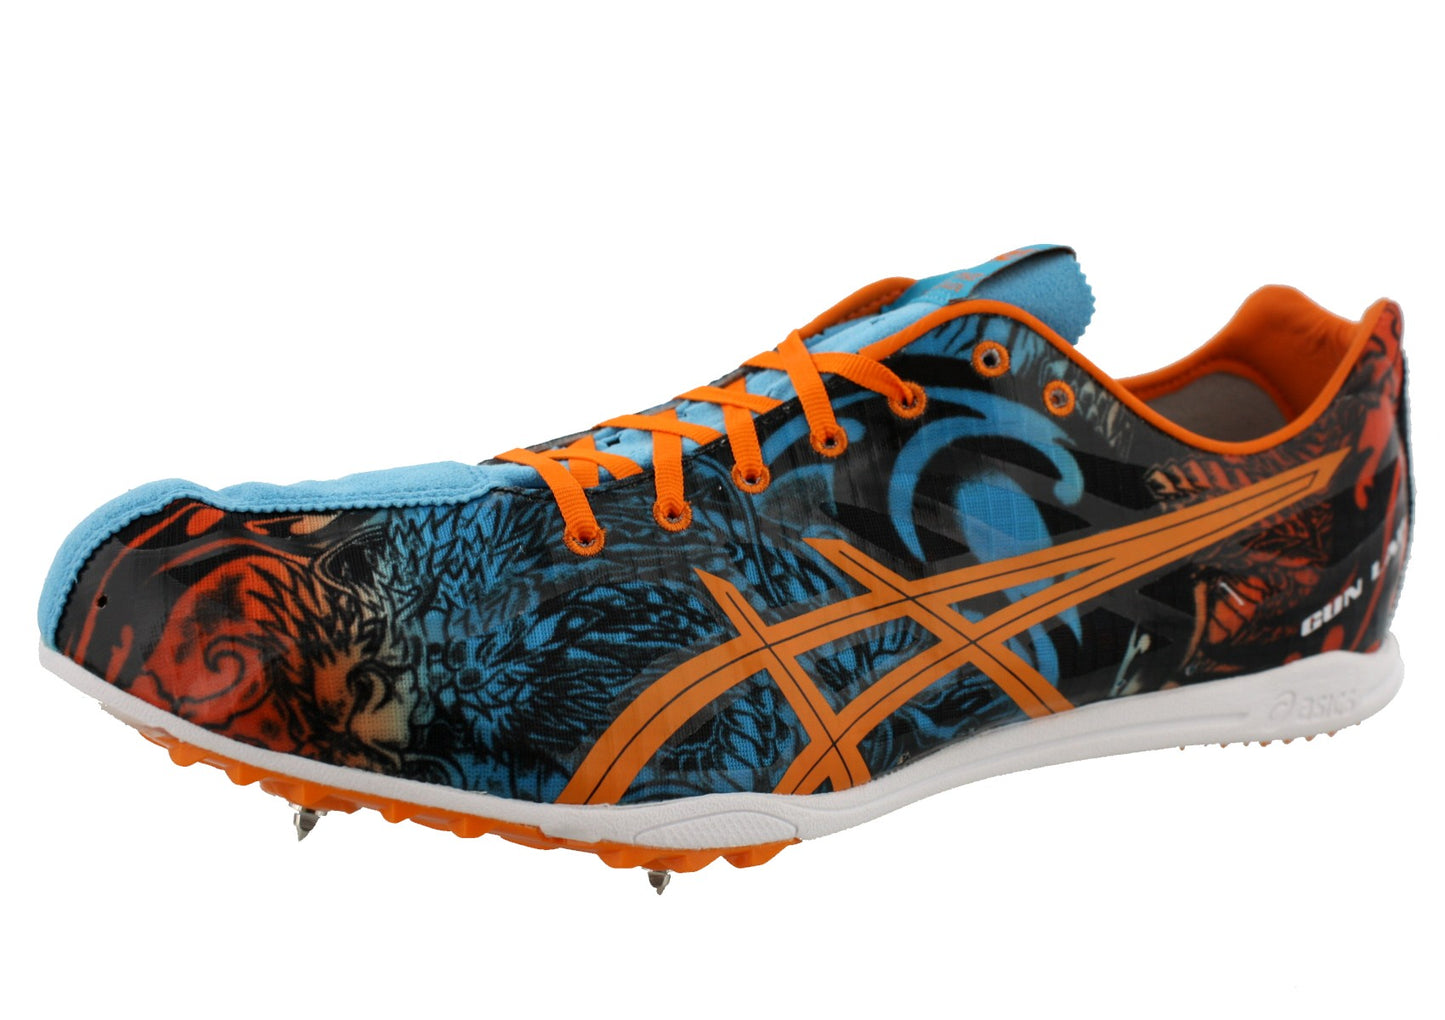 Lateral of Blue/Dragon529602 ASICS Gunlap Men's Track Shoes with Removable Spikes